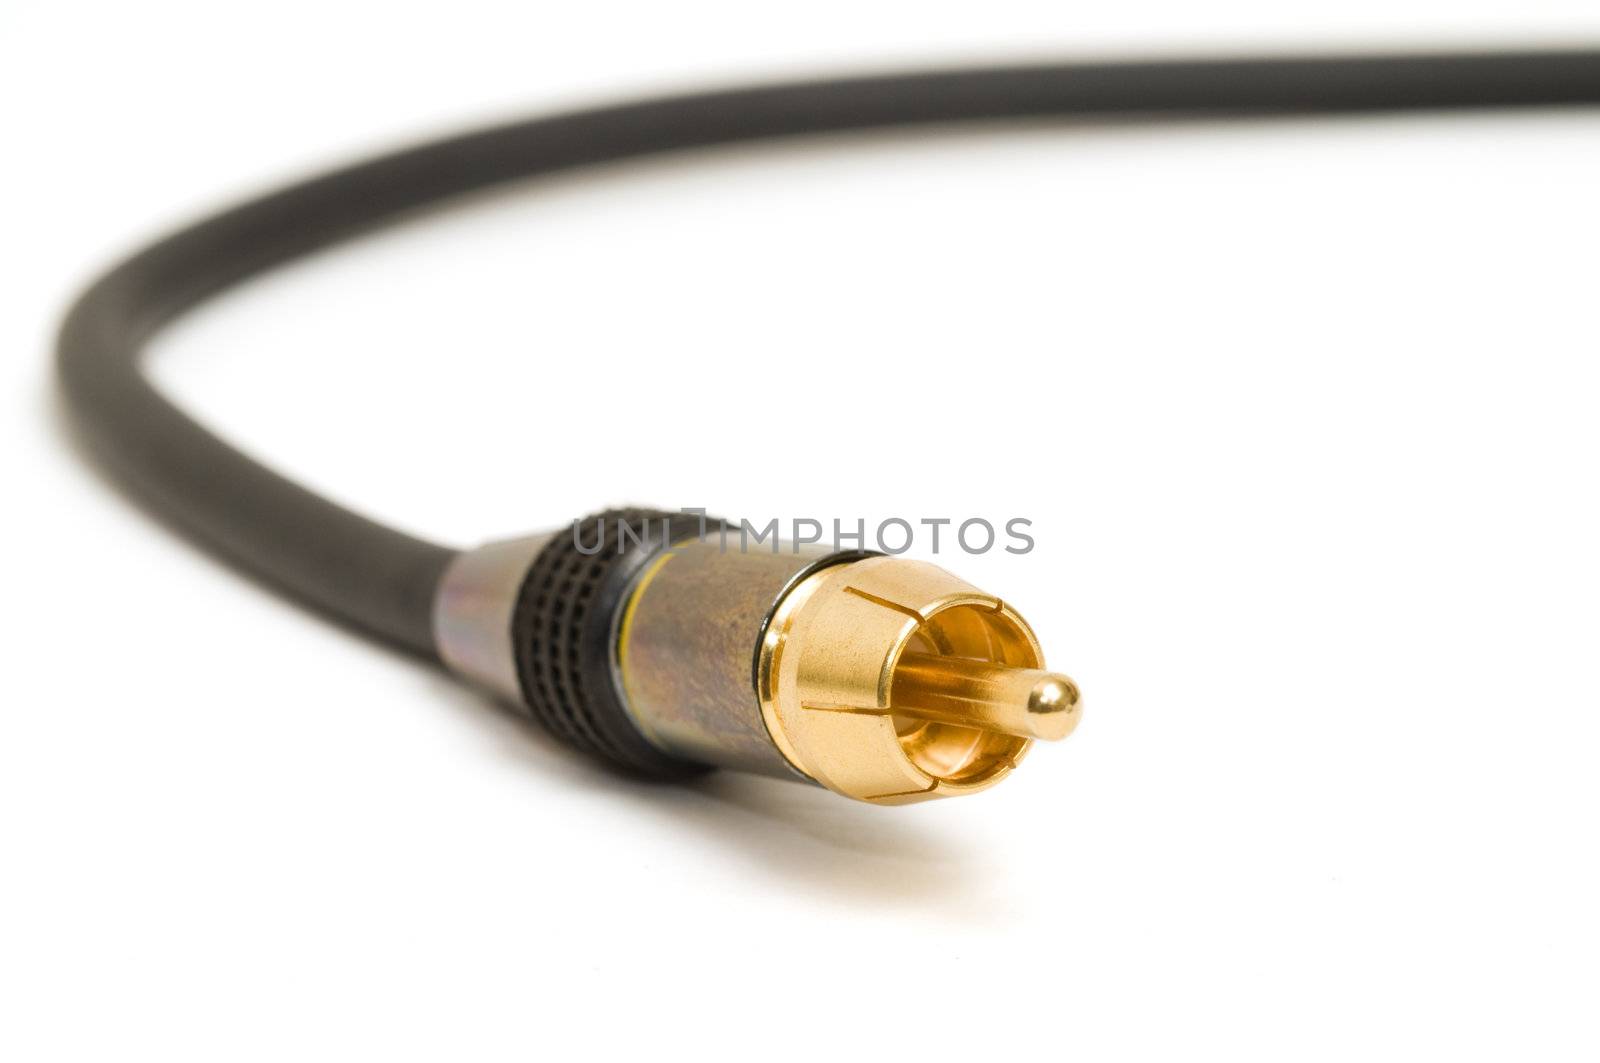 Video Cable Connection by Gordo25